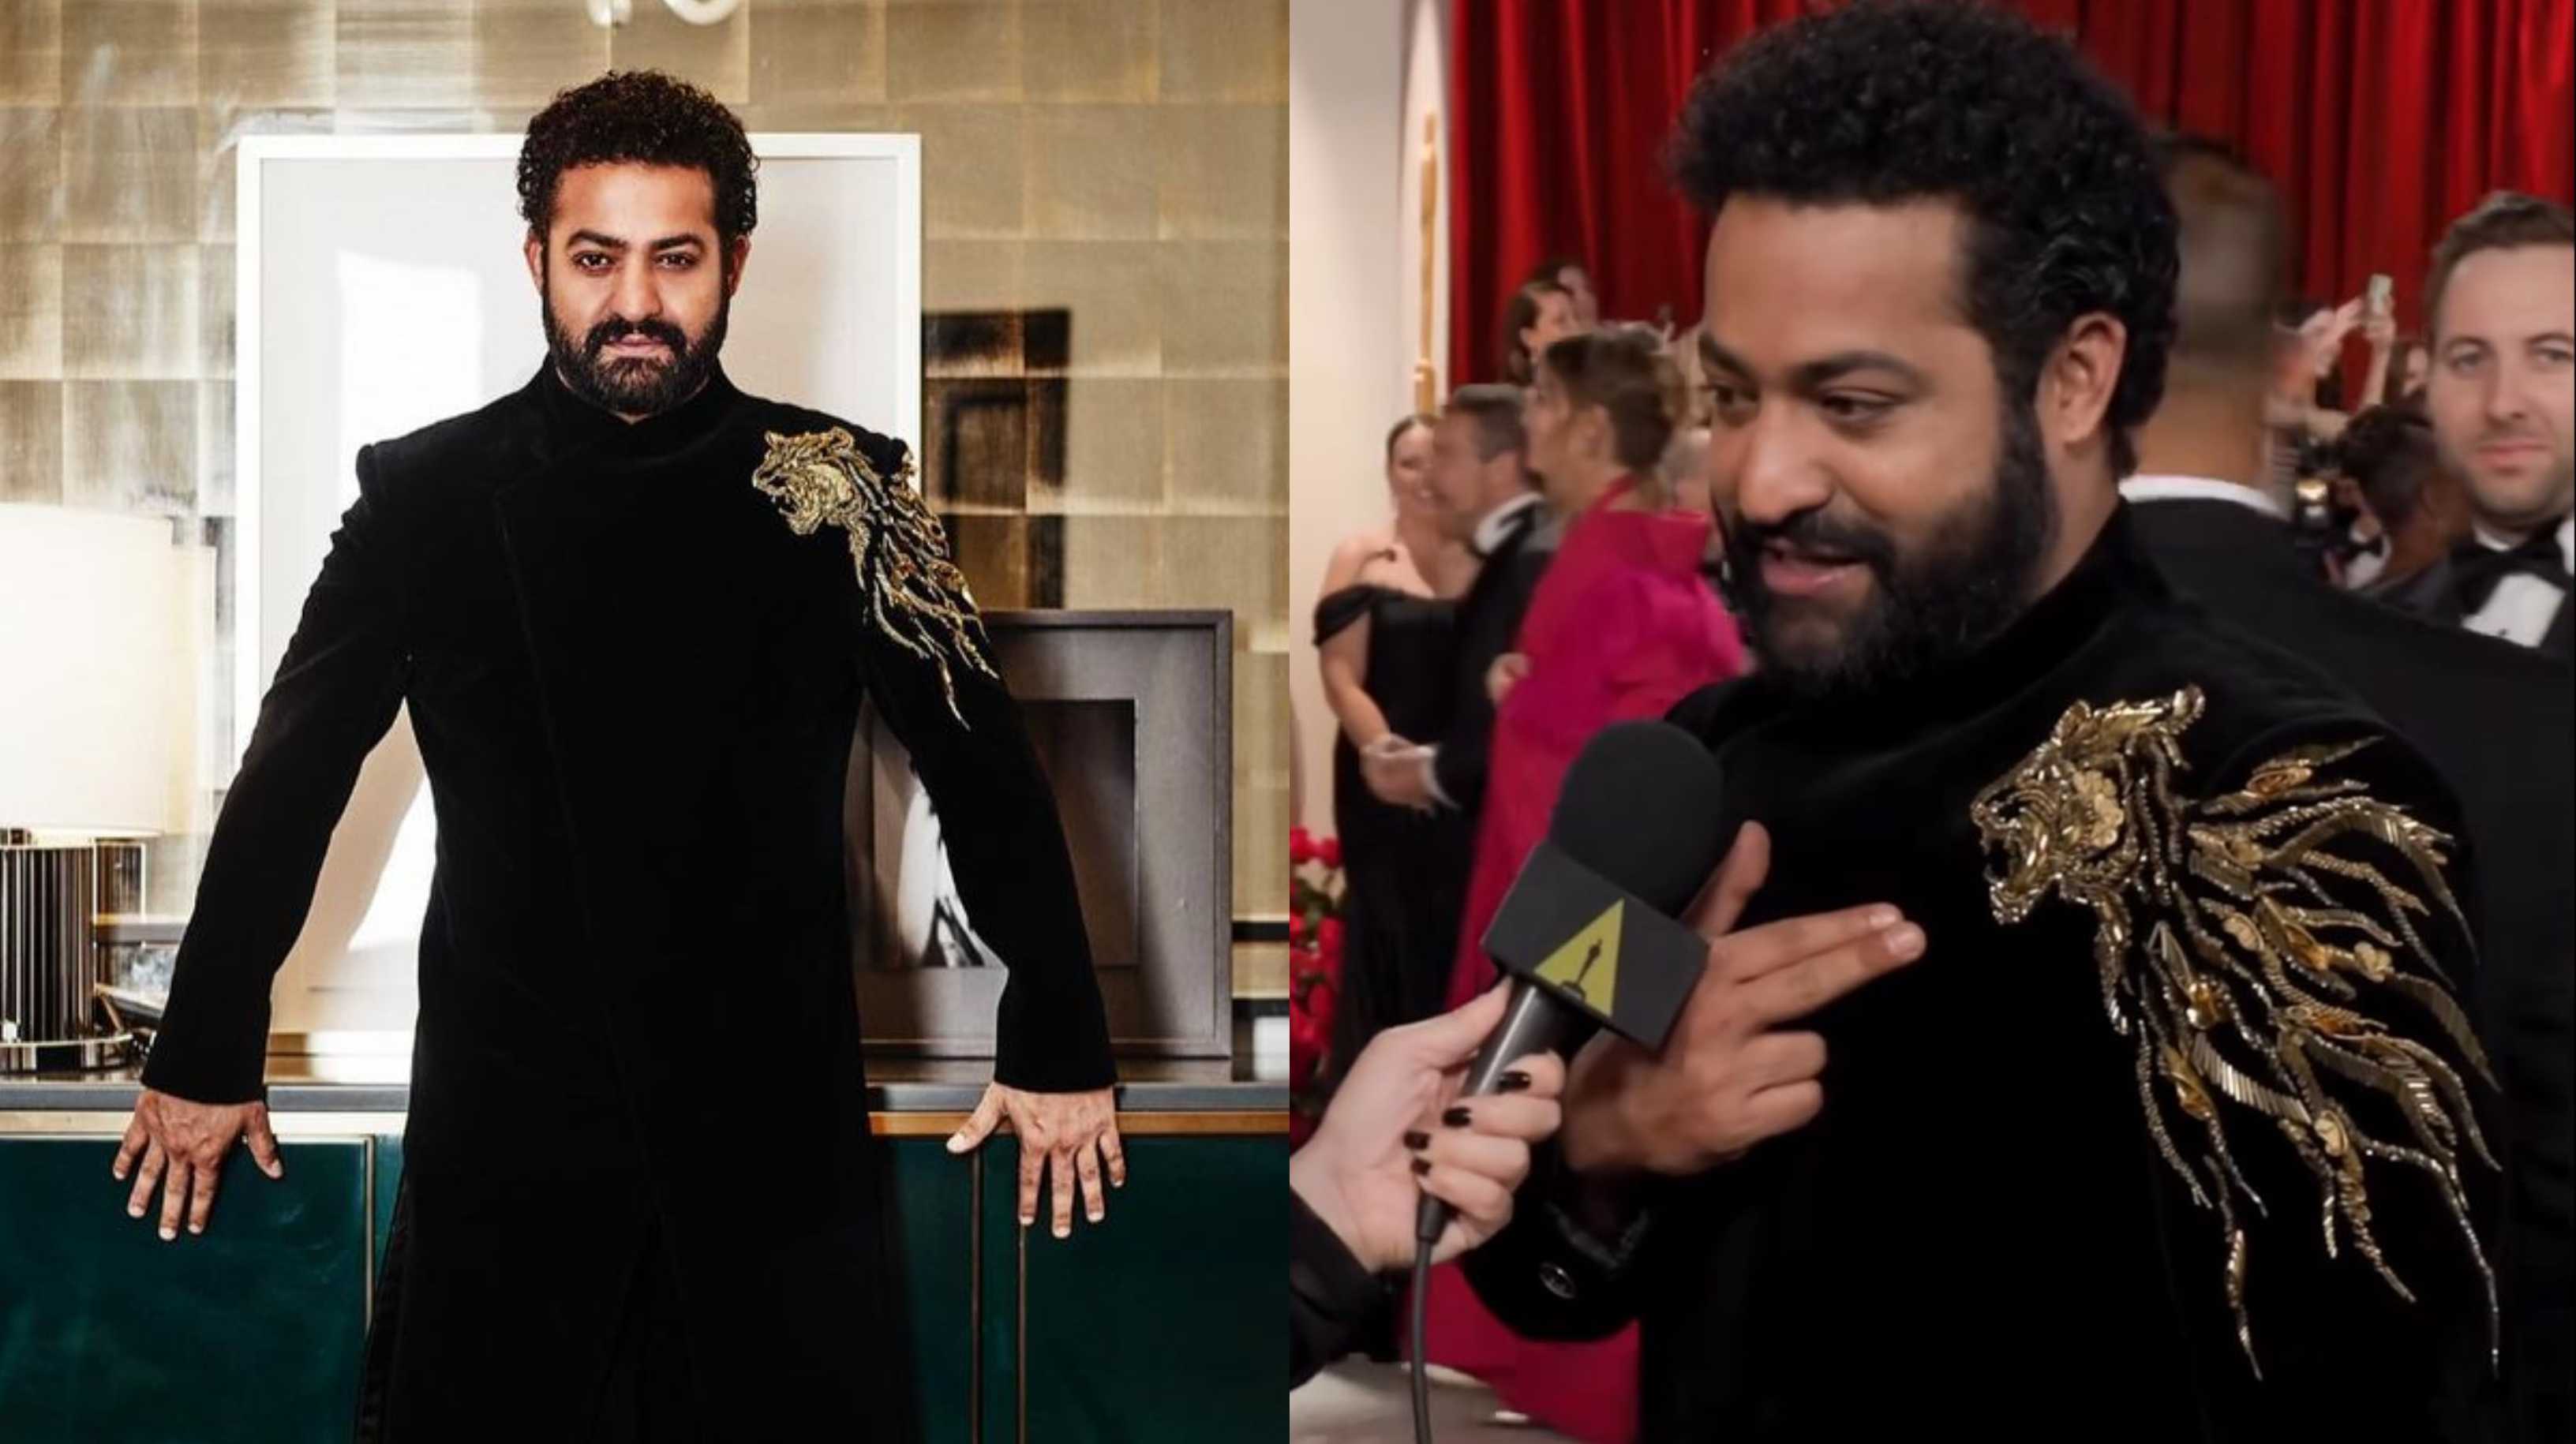 RRR star Jr NTR reveals the heartwarming reason why his bandhgala for the Oscars has a tiger on it; watch